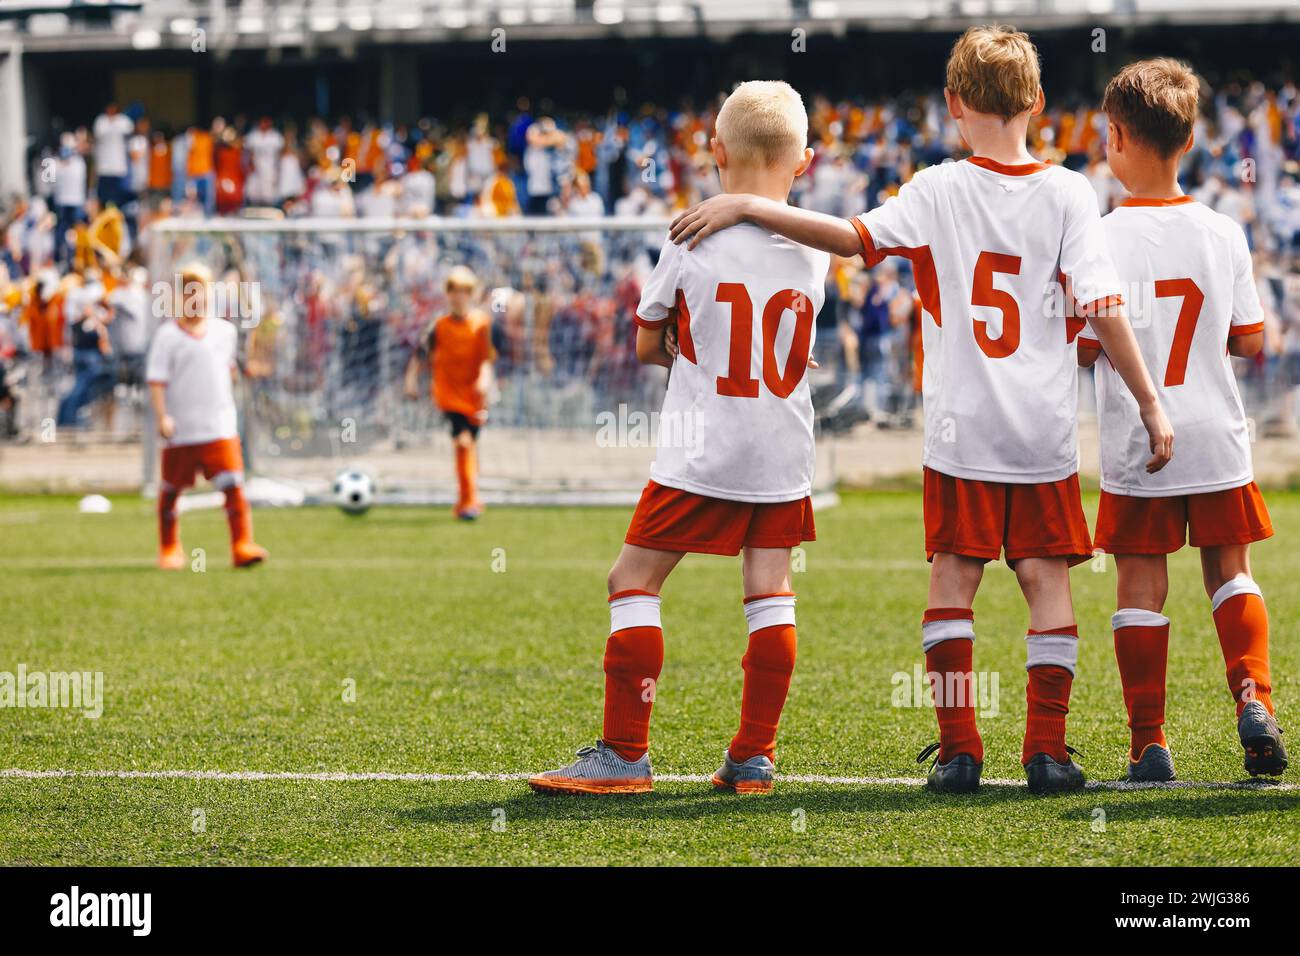 School Boys as Soccer Friends Teammates. Kids United in a Sports Team During Penalty Kick Game. Children in Football Uniforms at a Sports Arena Playin Stock Photo